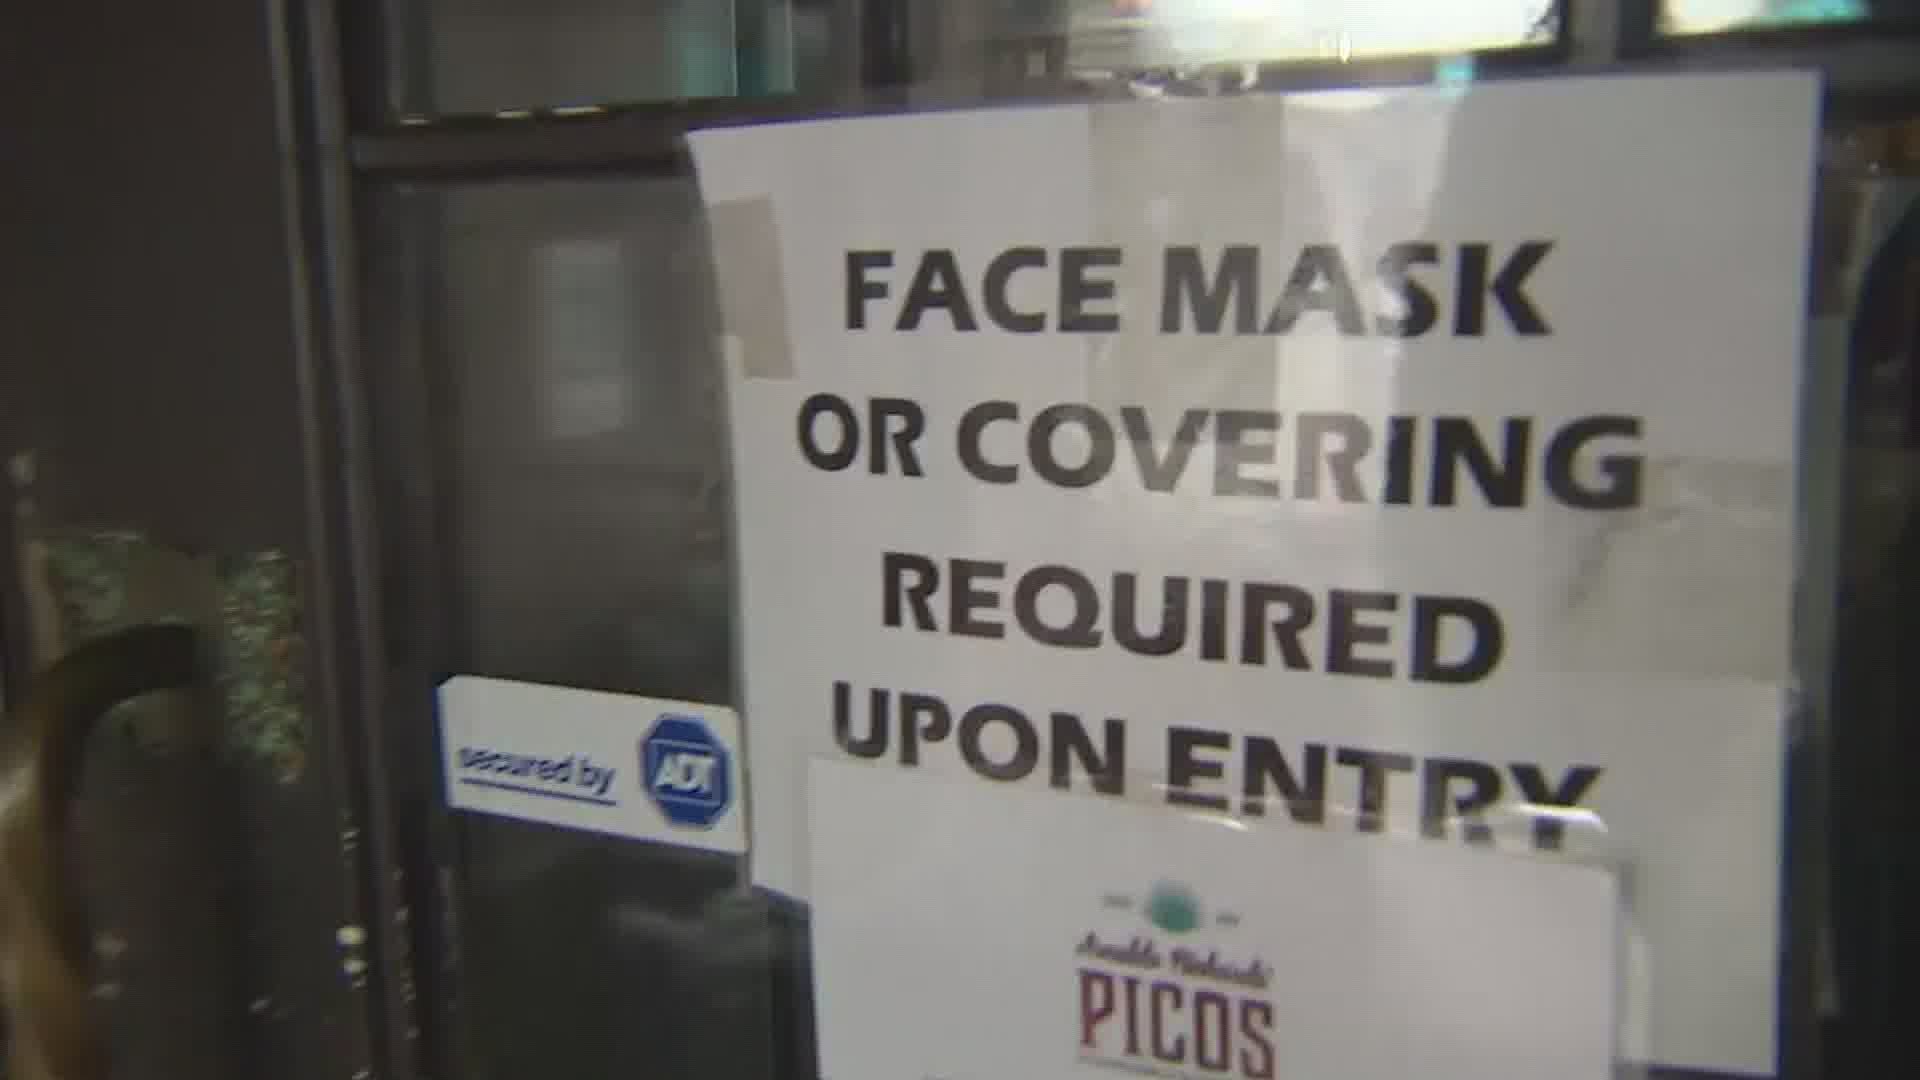 Some Houston-area restaurants plan to require face coverings after Gov. Abbott's mask mandate is lifted next week.